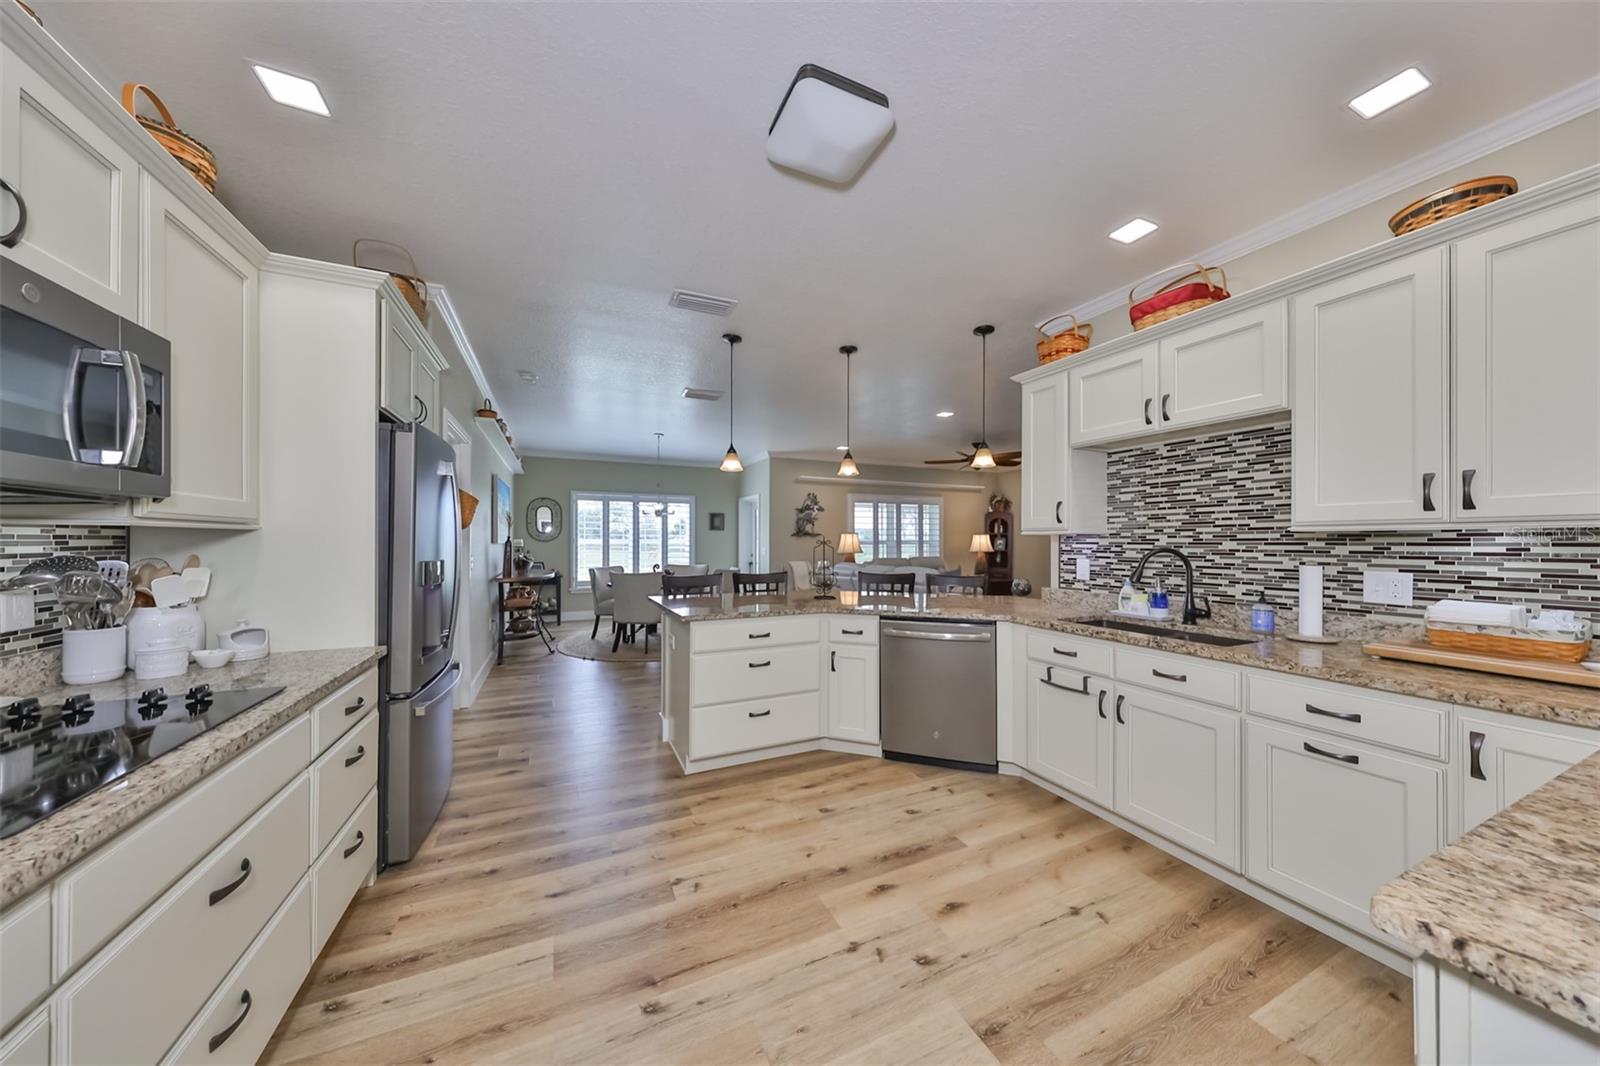 This huge kitchen is equipped with all newer stainless steel appliances (Refrigerator is 1 week old) and includes upgraded granite countertops with 42" all wood cabinets.